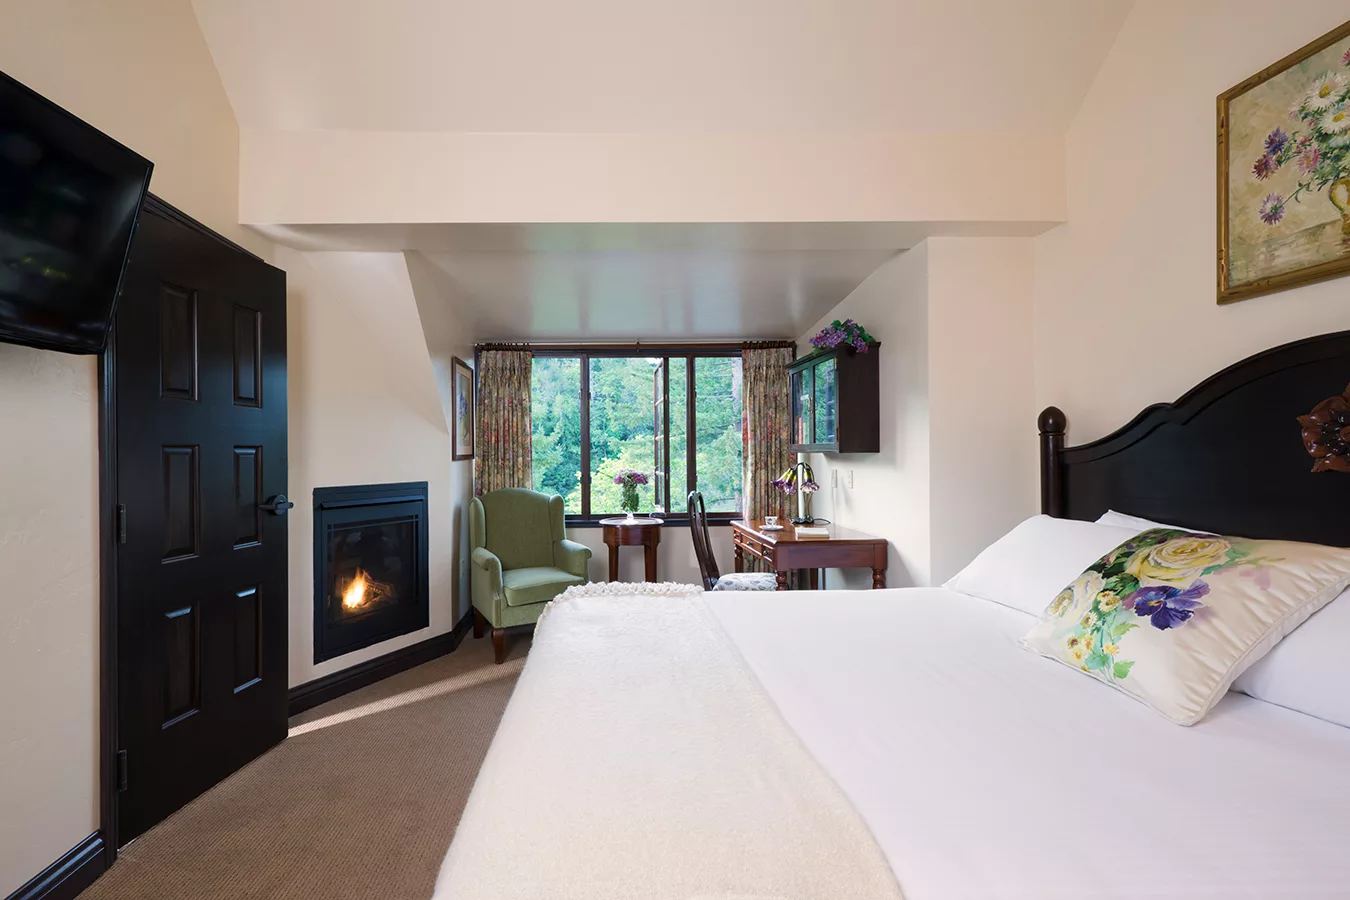 banner image is of Bedroom with fireplace and forest view at Benbow Historic Inn